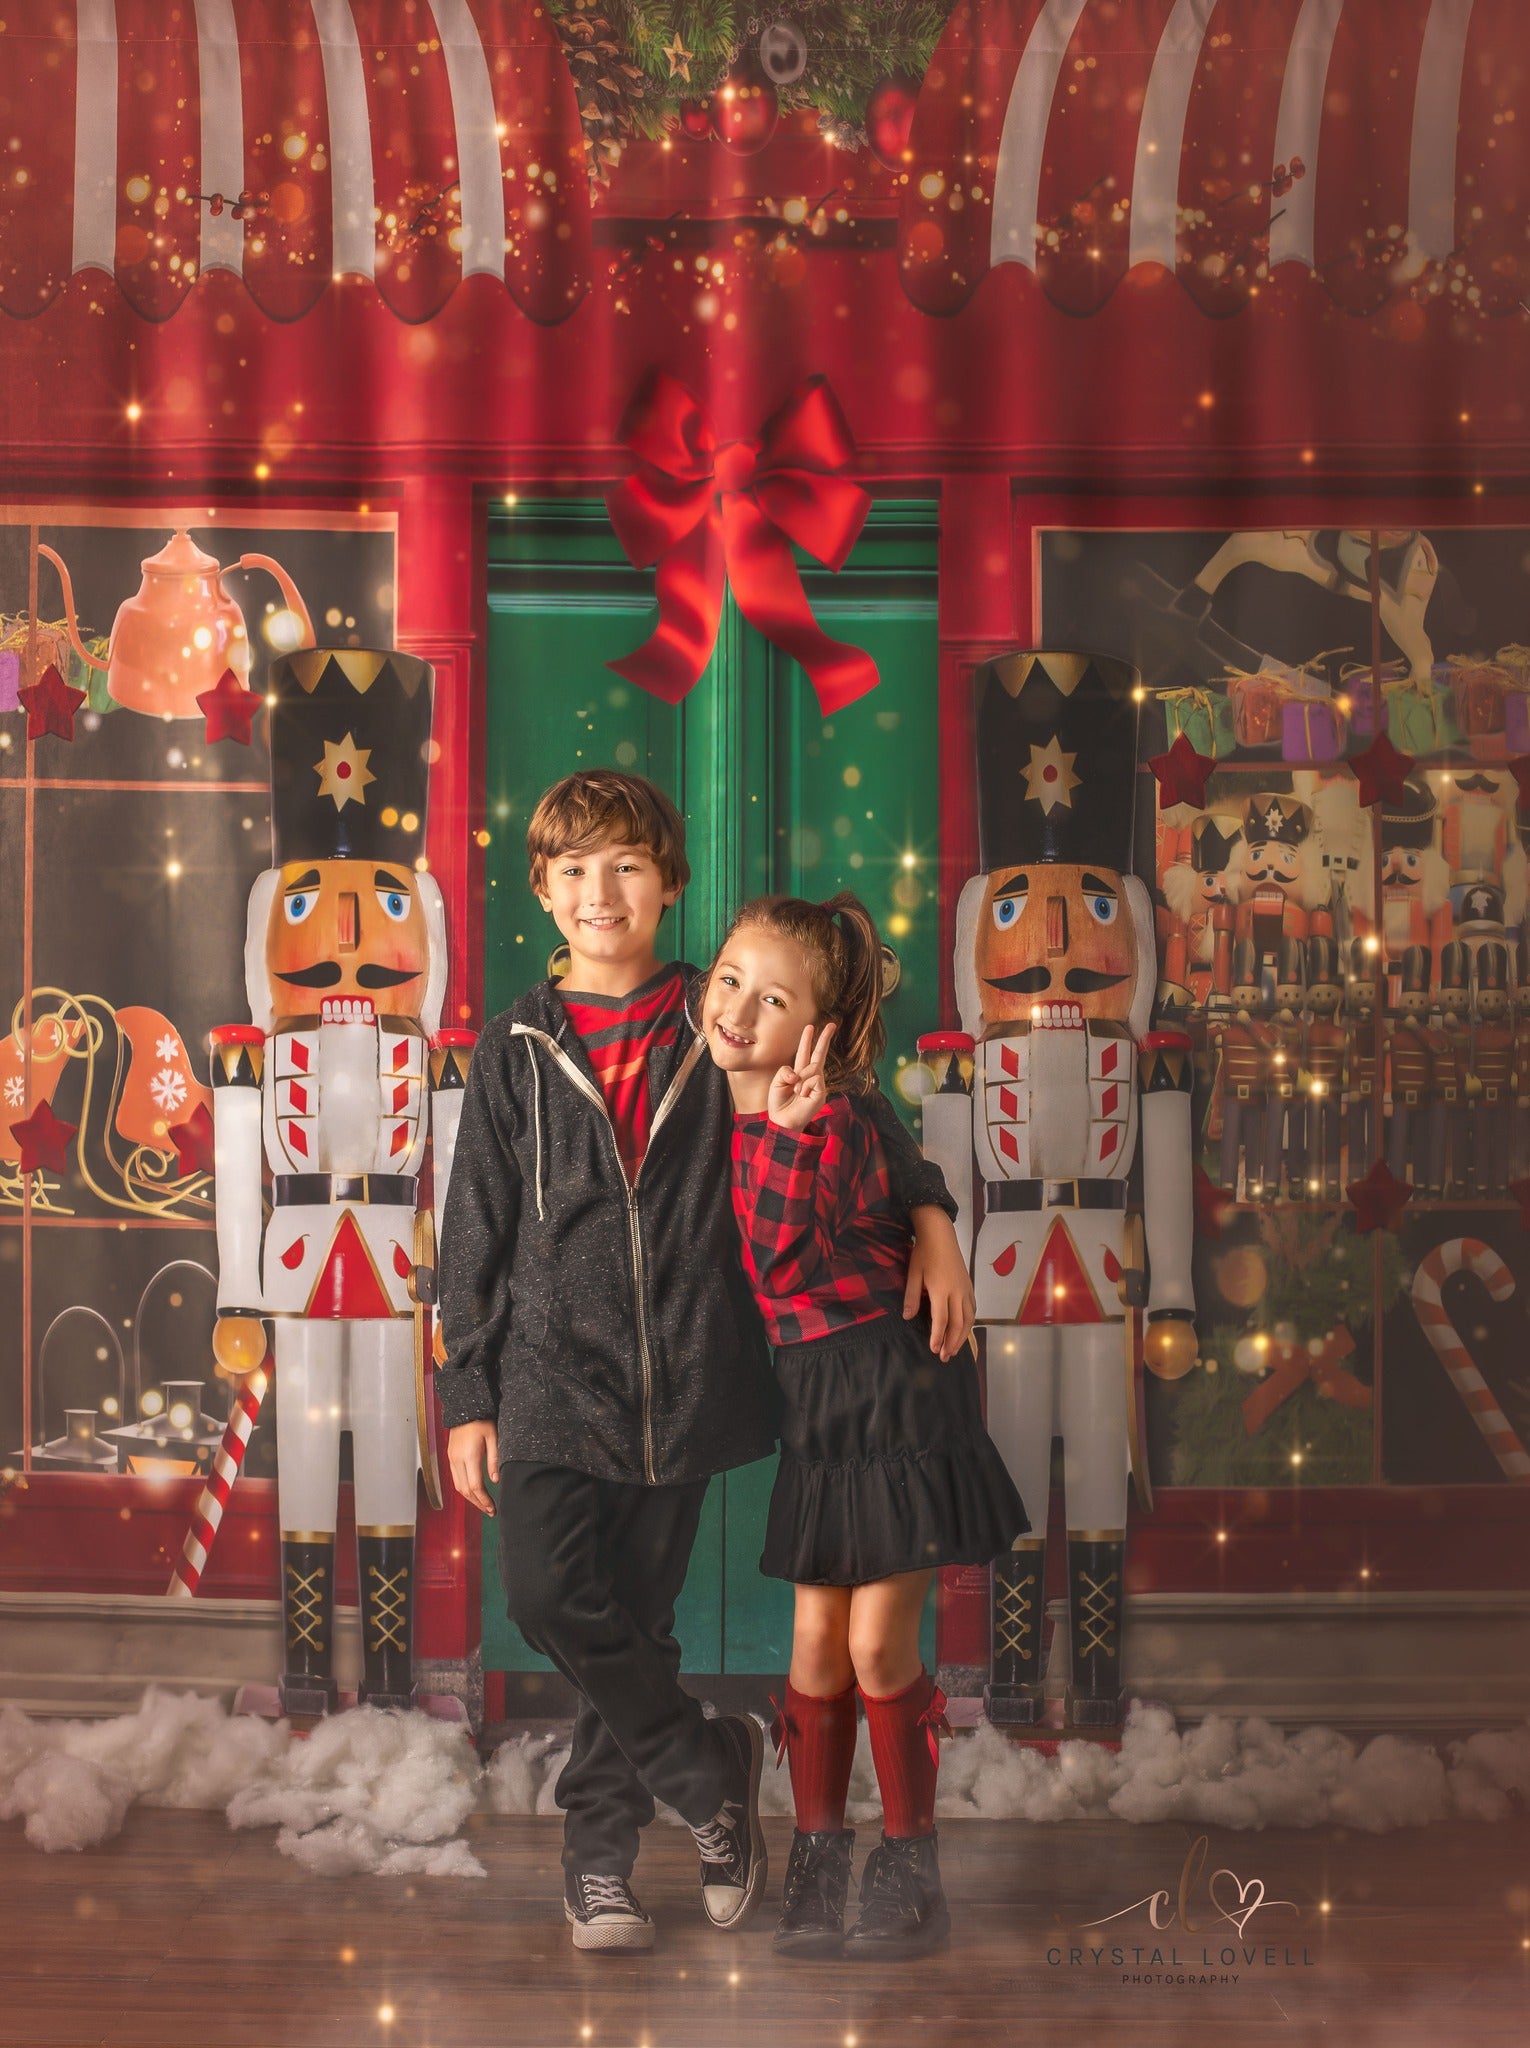 Kate Christmas Store Soldier Toys Nutcracker Backdrop for Photography